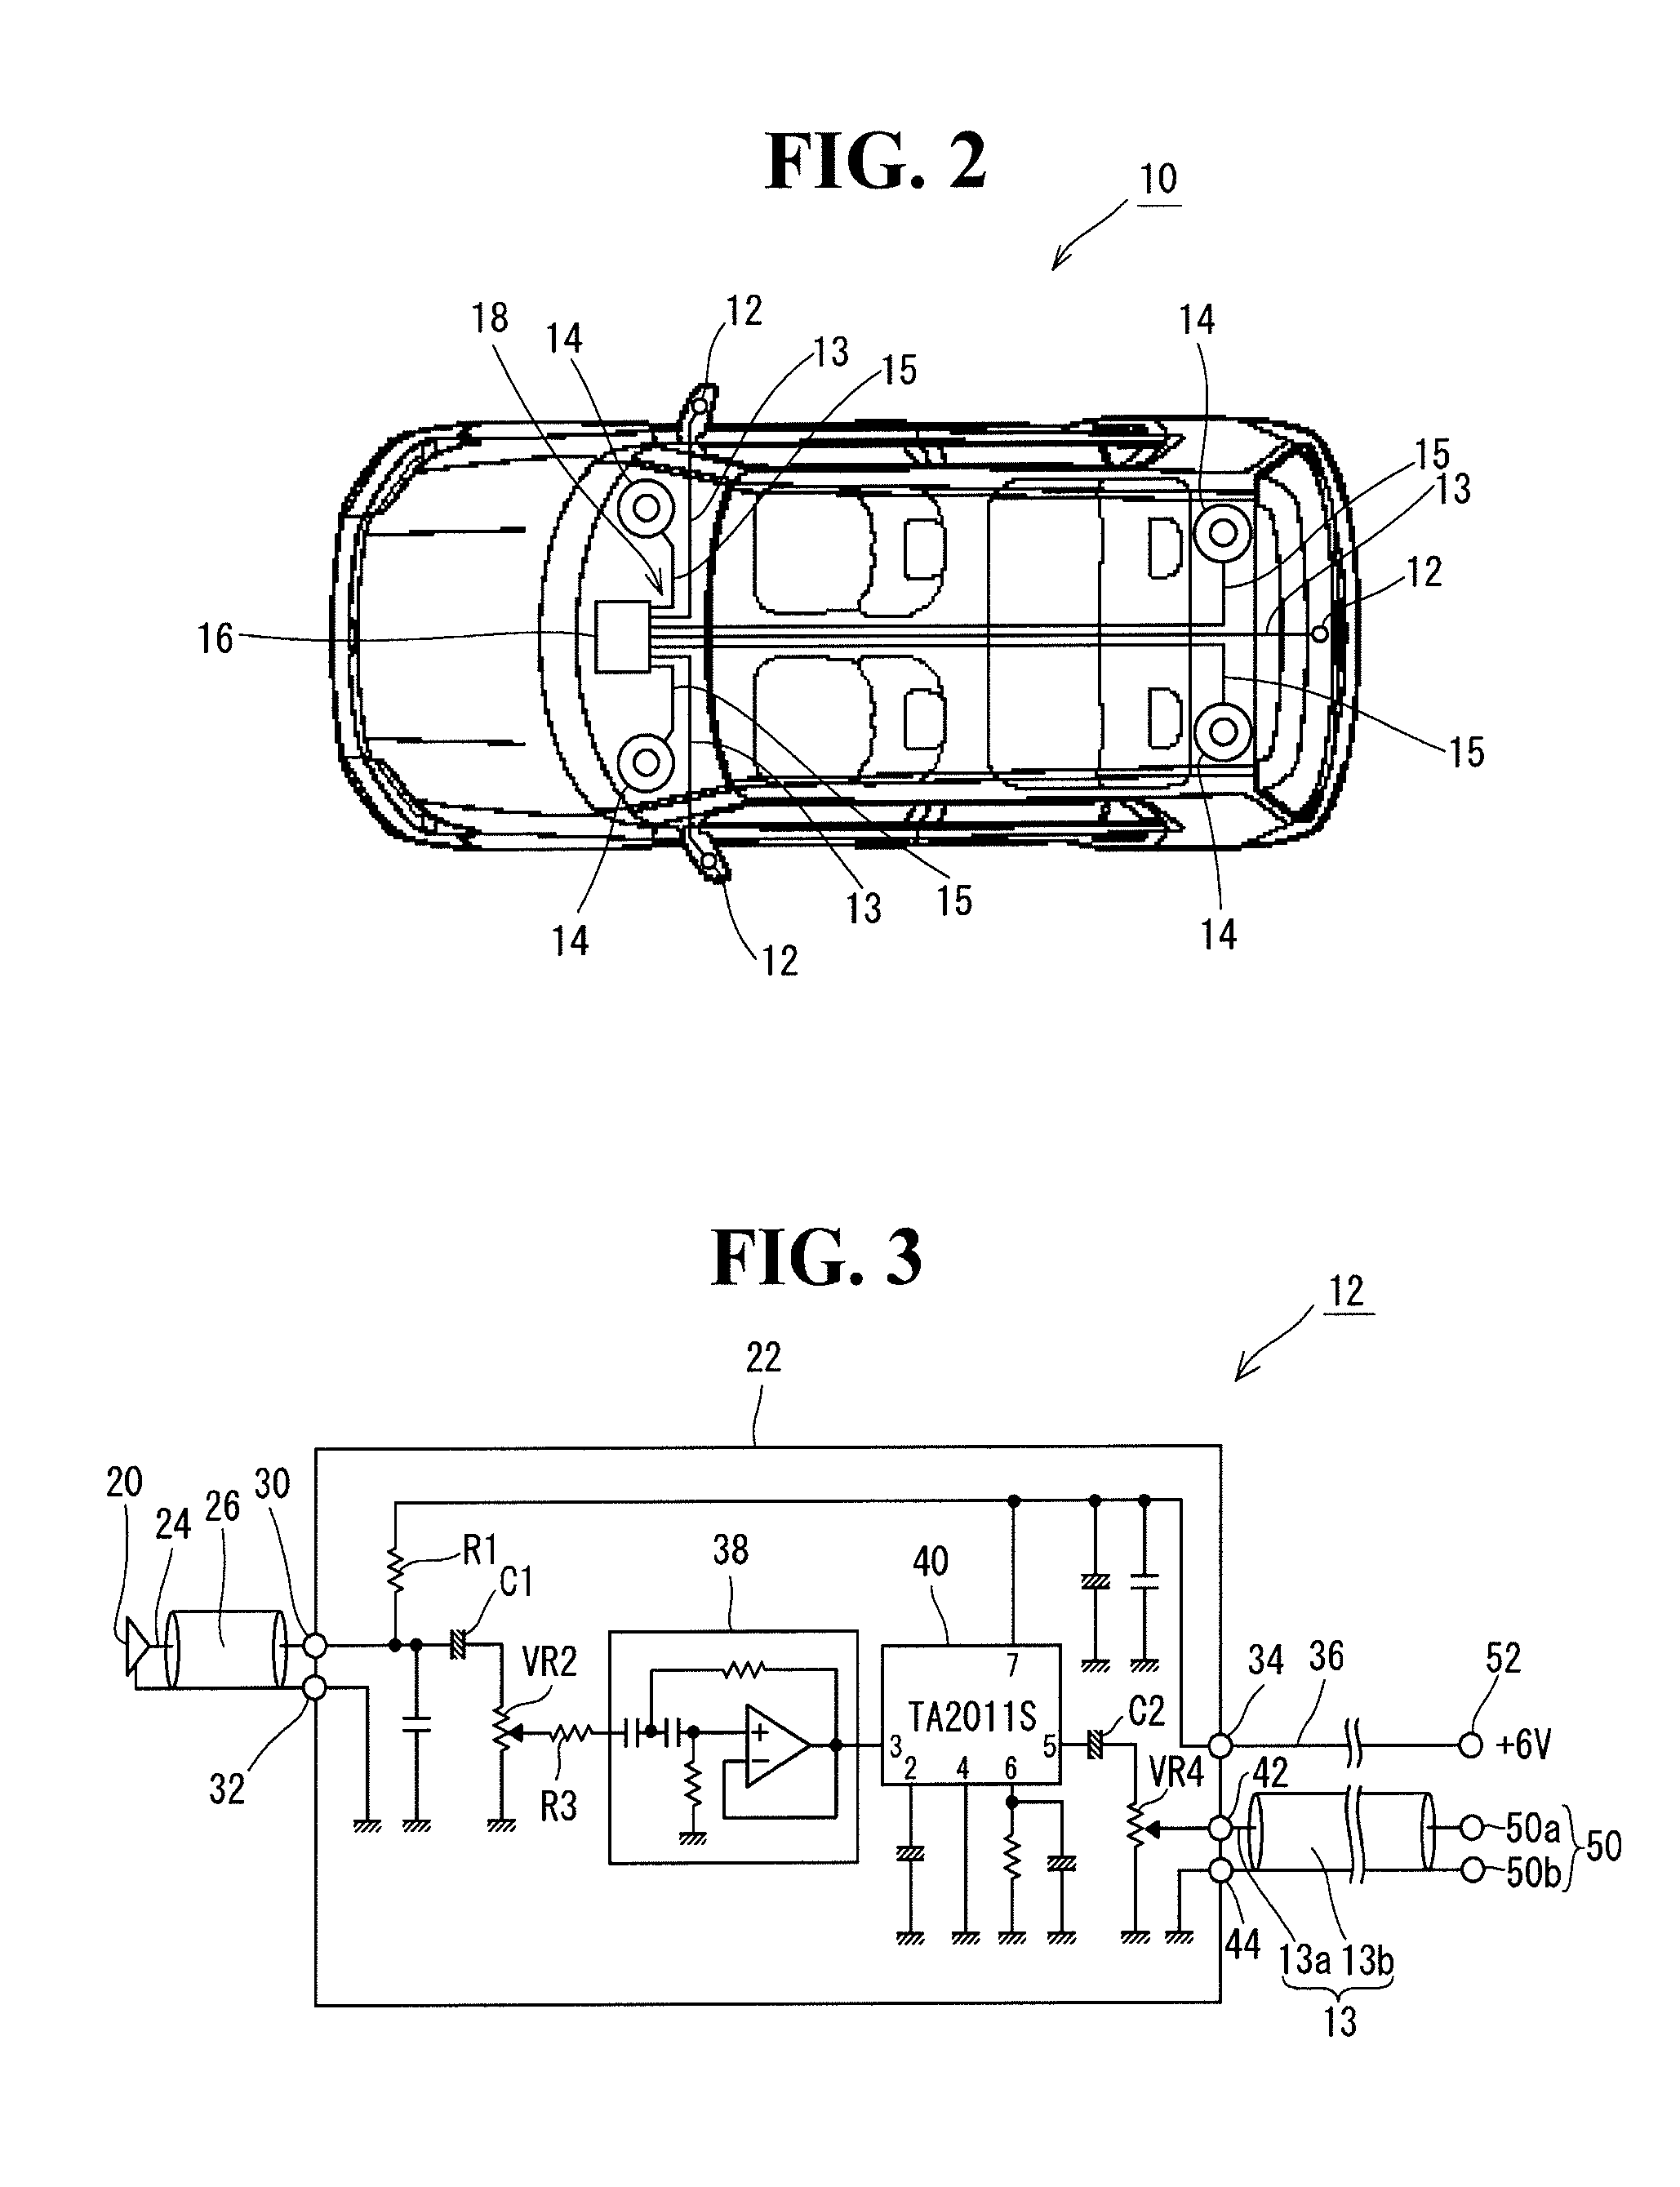 System for introducing sound outside vehicle